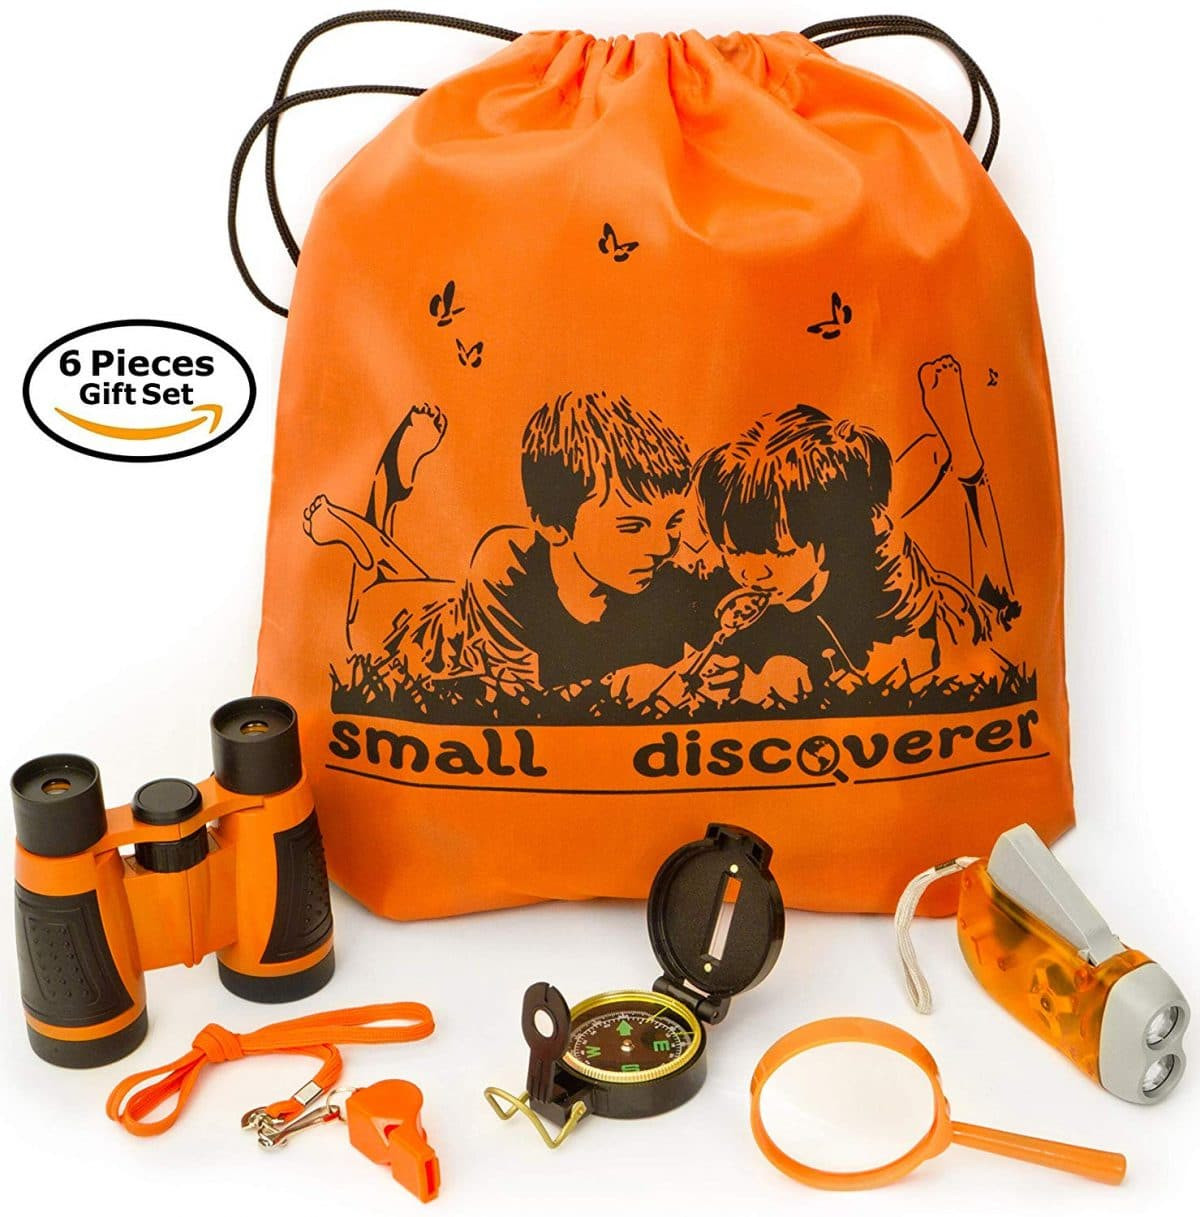 Outdoor Gift Ideas For Boys
 Best Toys and Gift Ideas for 10 Year Old Boys 2020